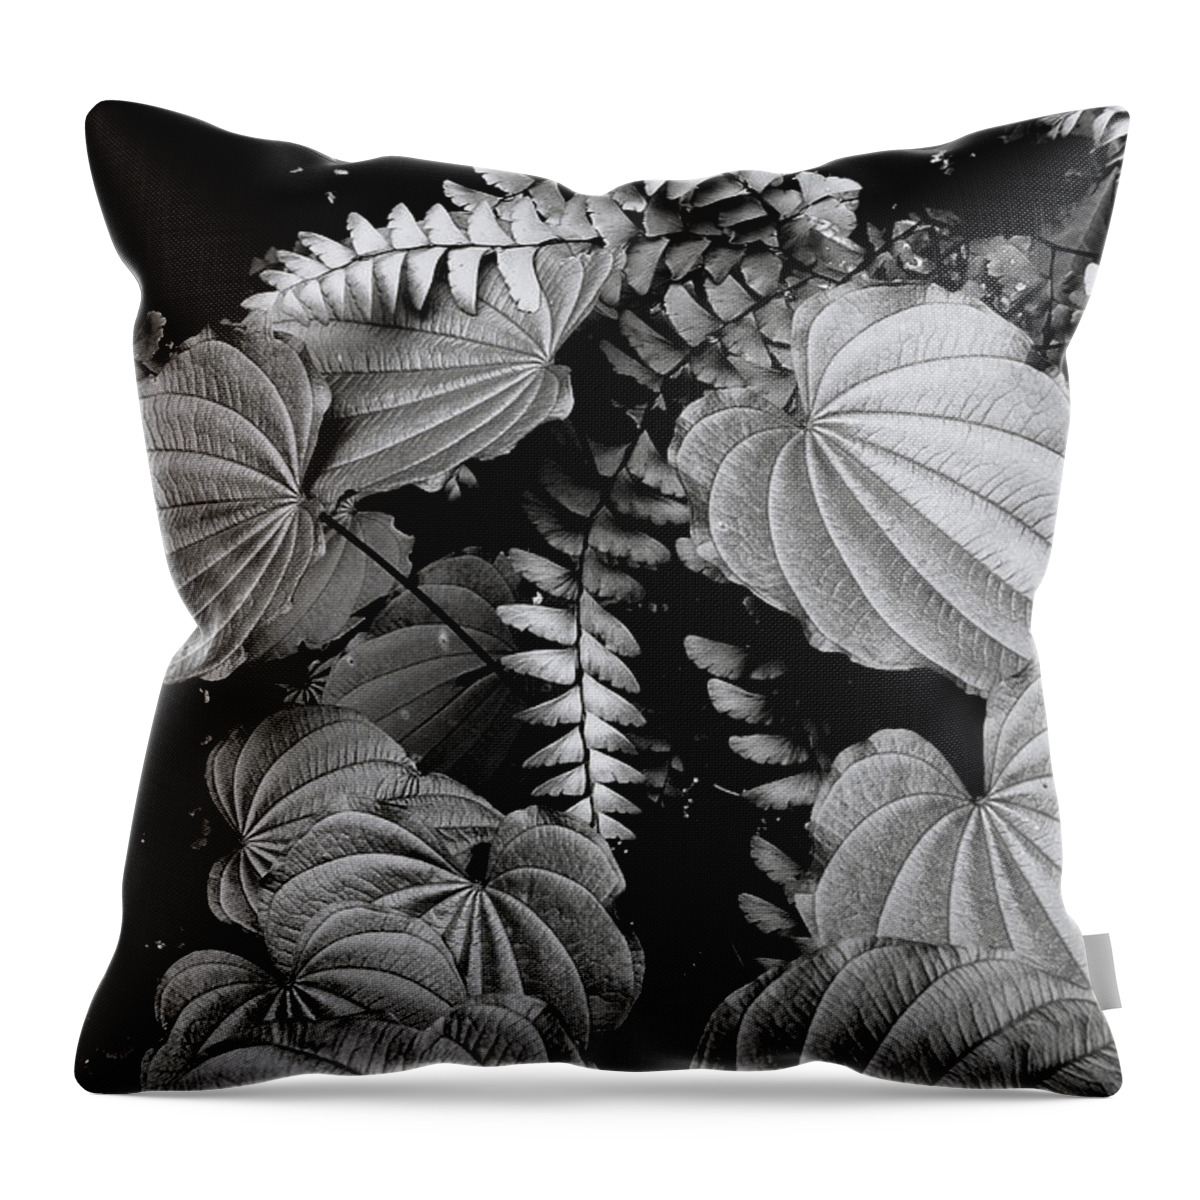 Leaves And Fern Throw Pillow featuring the photograph Leaves and Fern by Michael Eingle